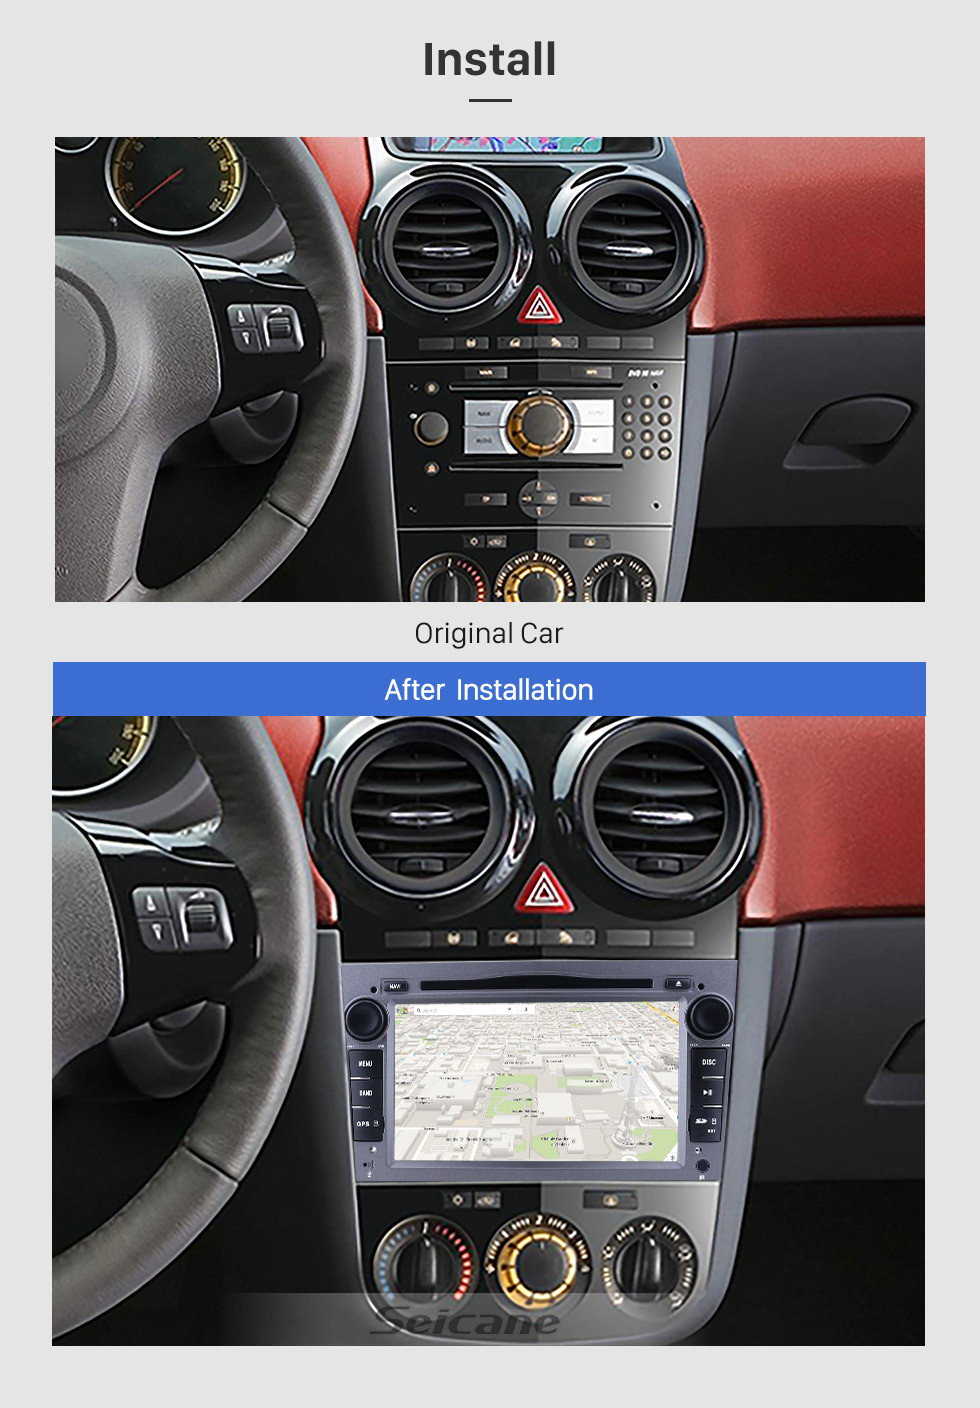 Seicane OEM Android 9.0 2005-2009 Opel Vectra GPS Radio Replacement with HD 1024*600 Touch Screen Bluetooth Music MP3 3G WiFi DVD Player 1080P AUX Steering Wheel Control Backup Camera